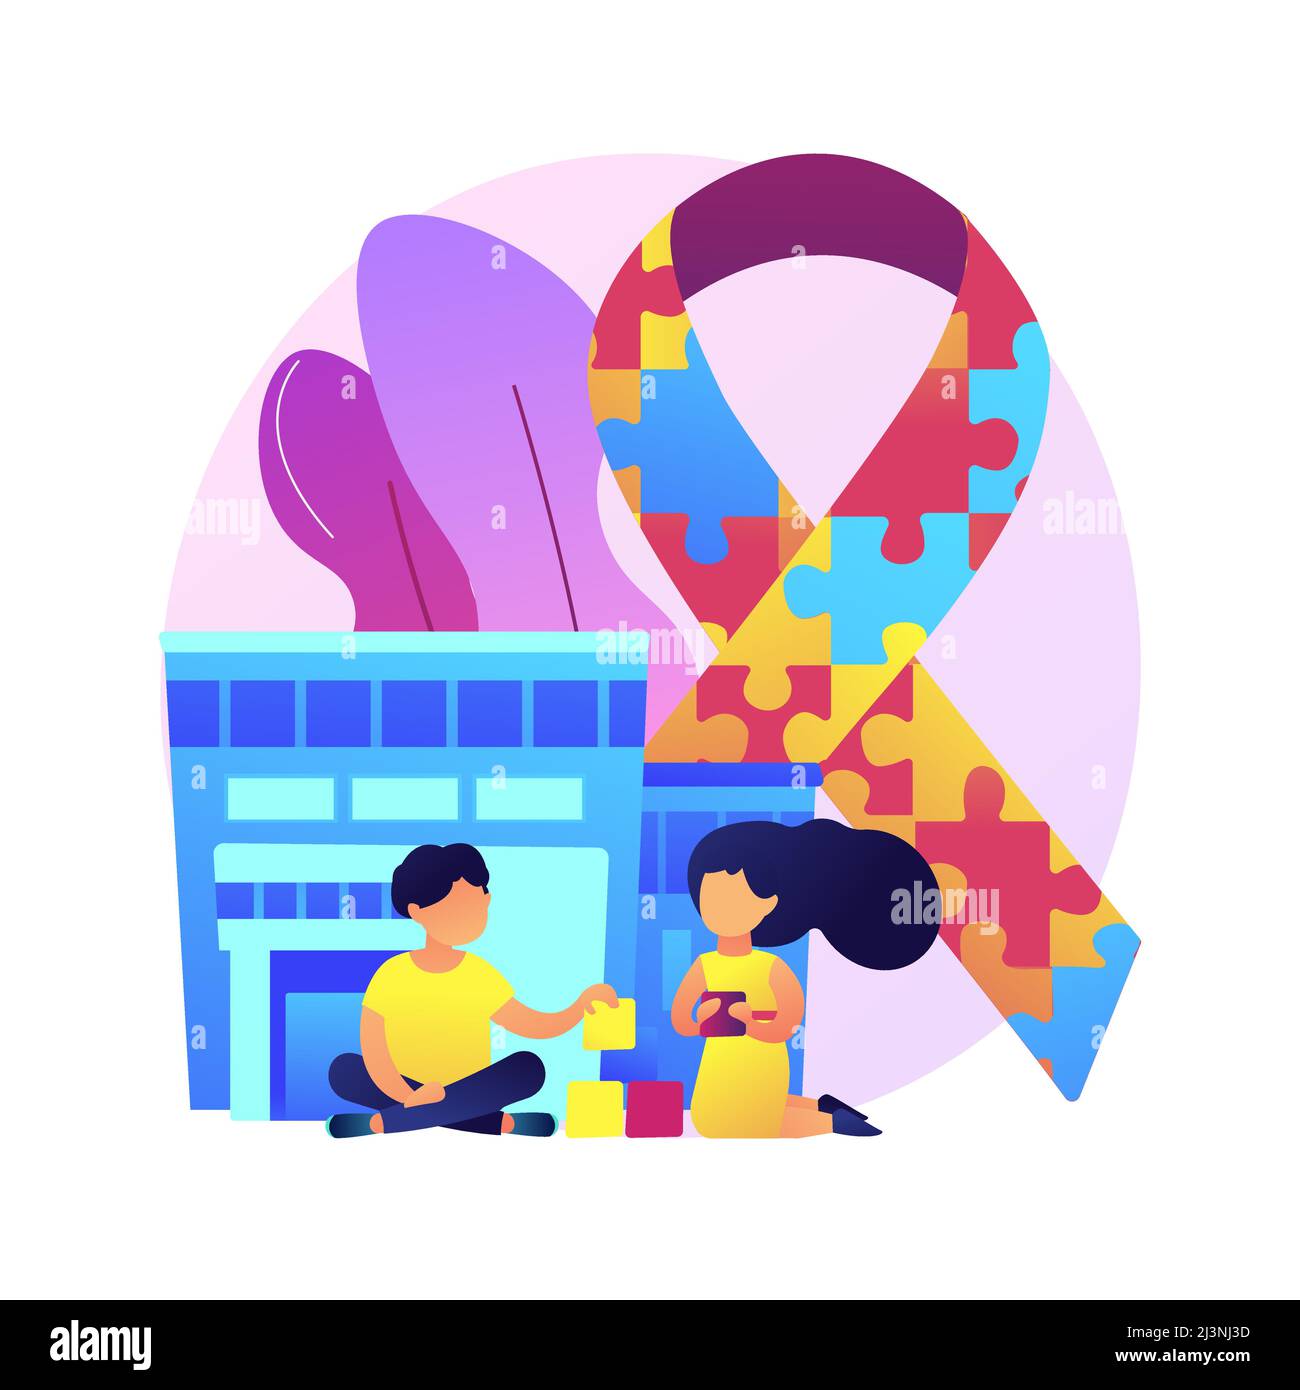 Autism center abstract concept vector illustration. Learning disability center, treatment of autism spectrum disorder, kids with special needs help, c Stock Vector